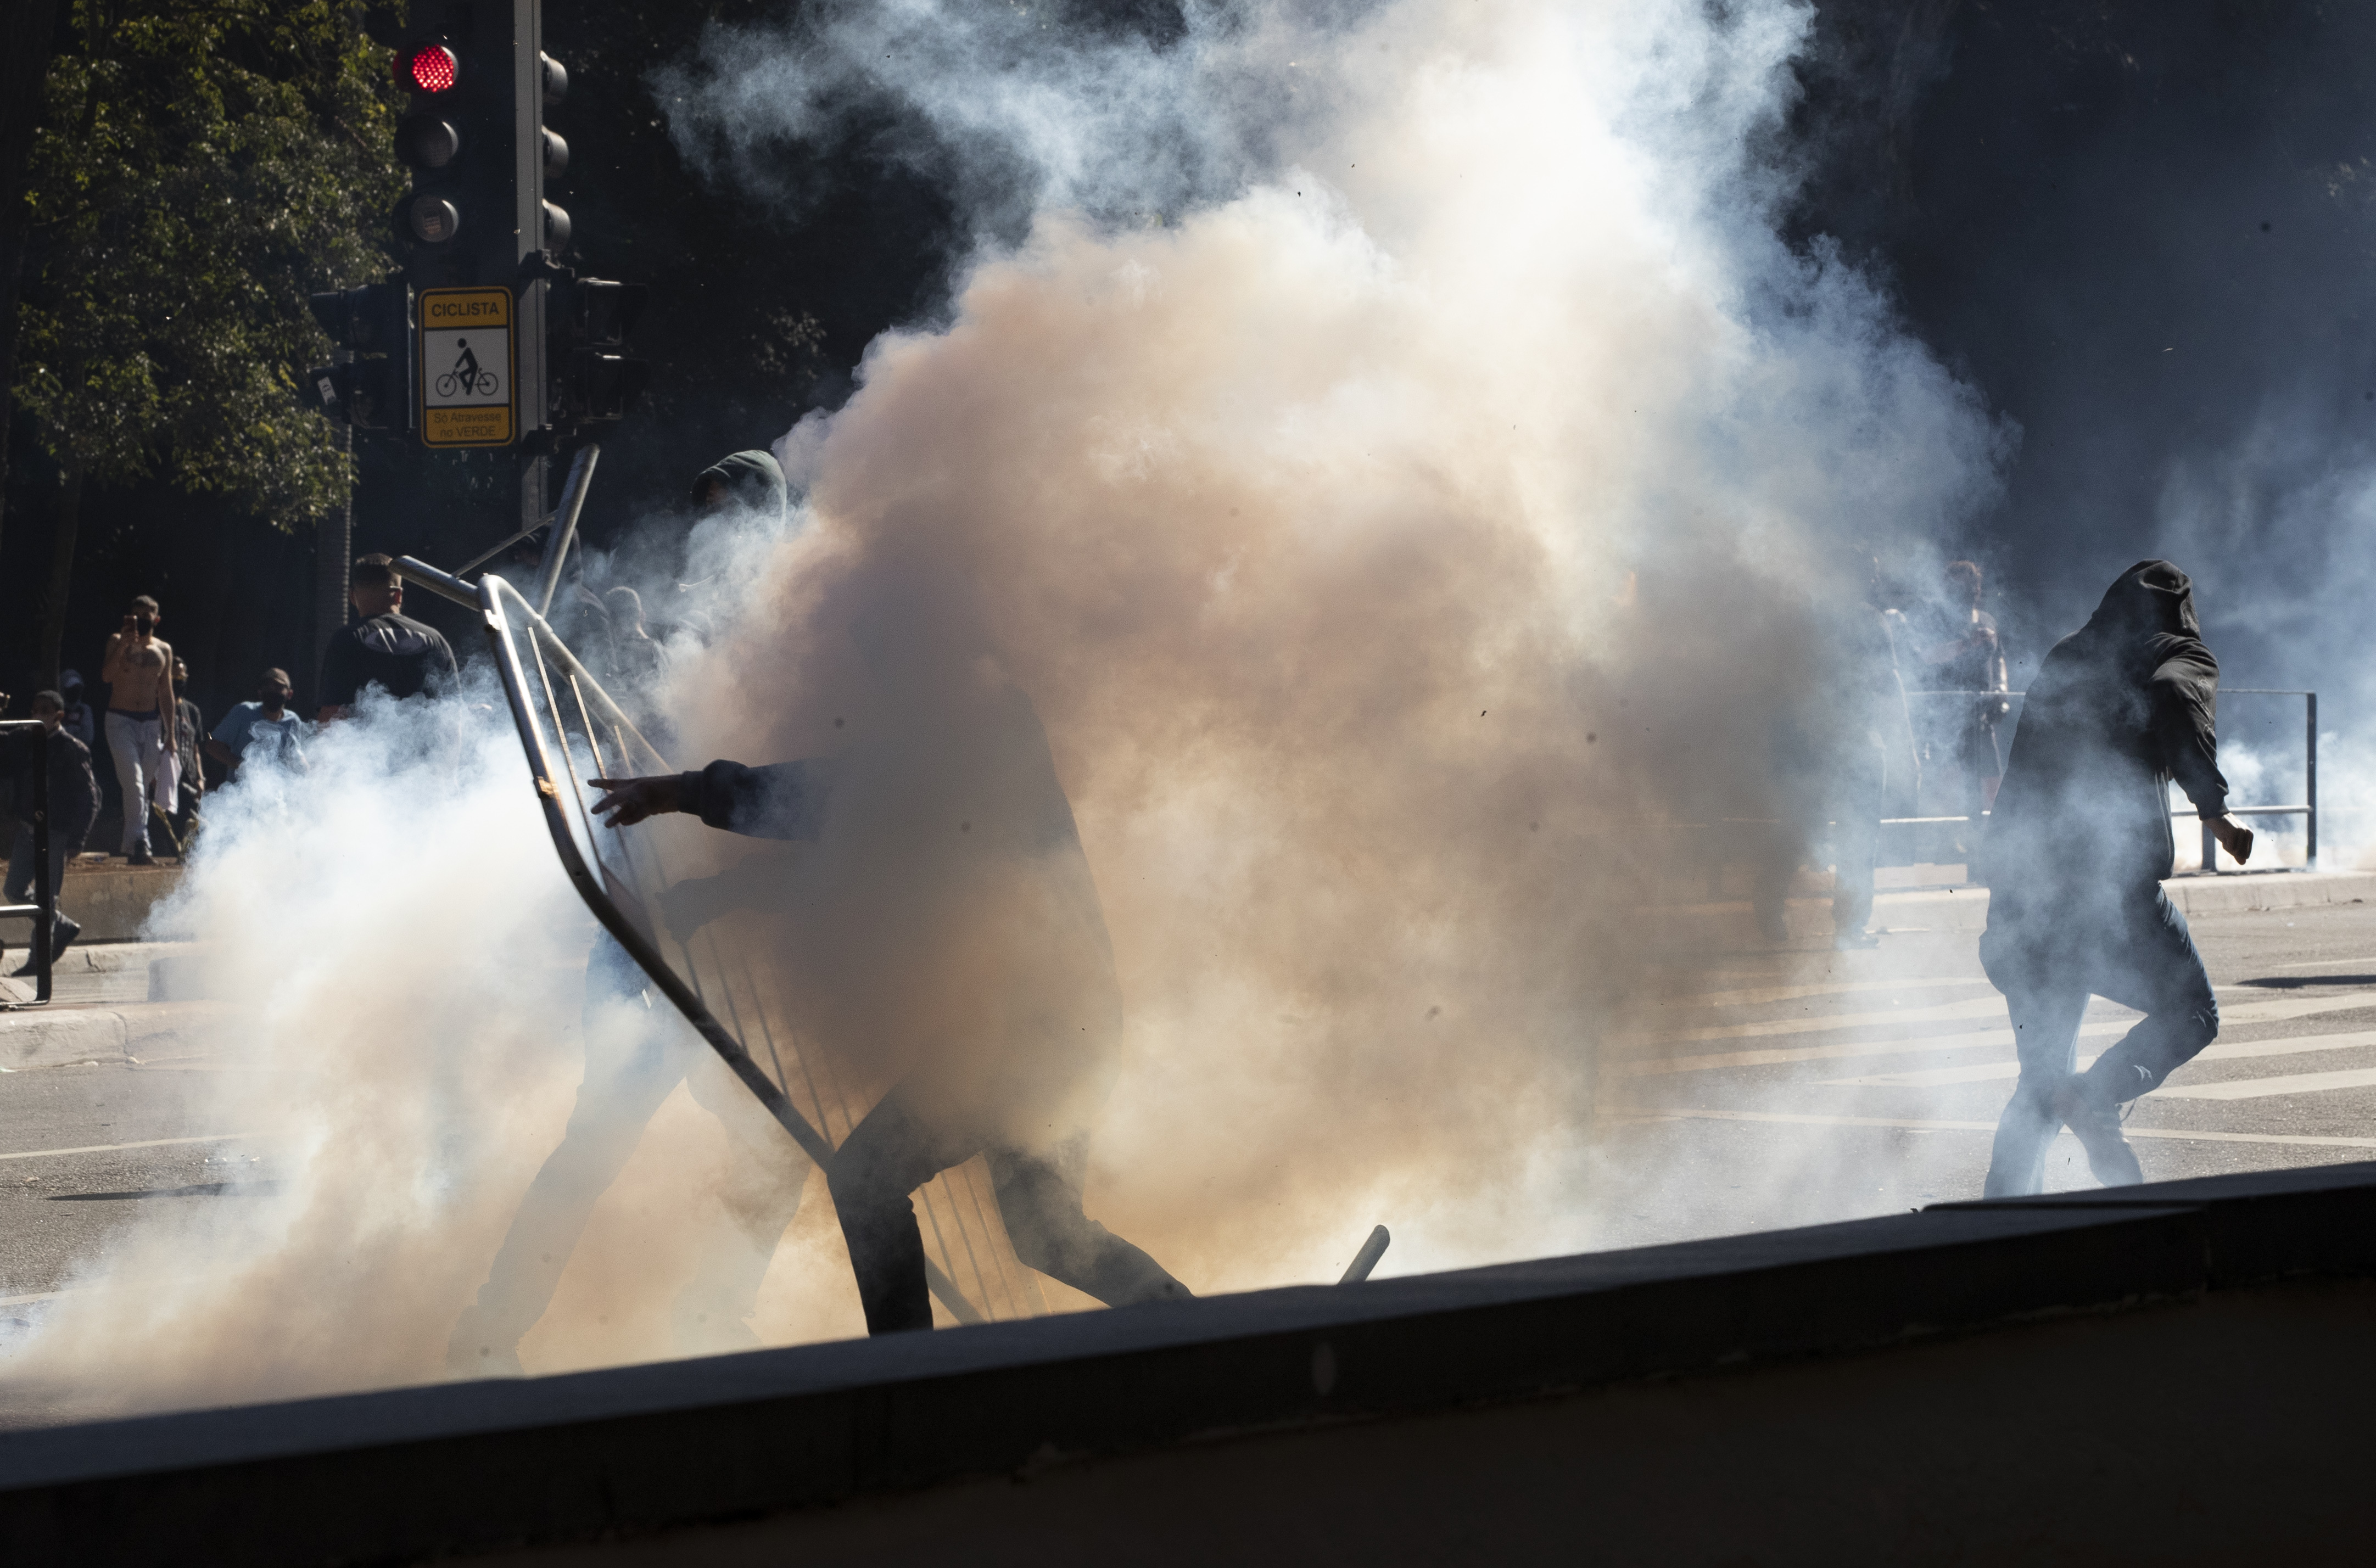 An anti-government demonstrator is engulfed by a cloud of teargas during clashes in Sao Paulo